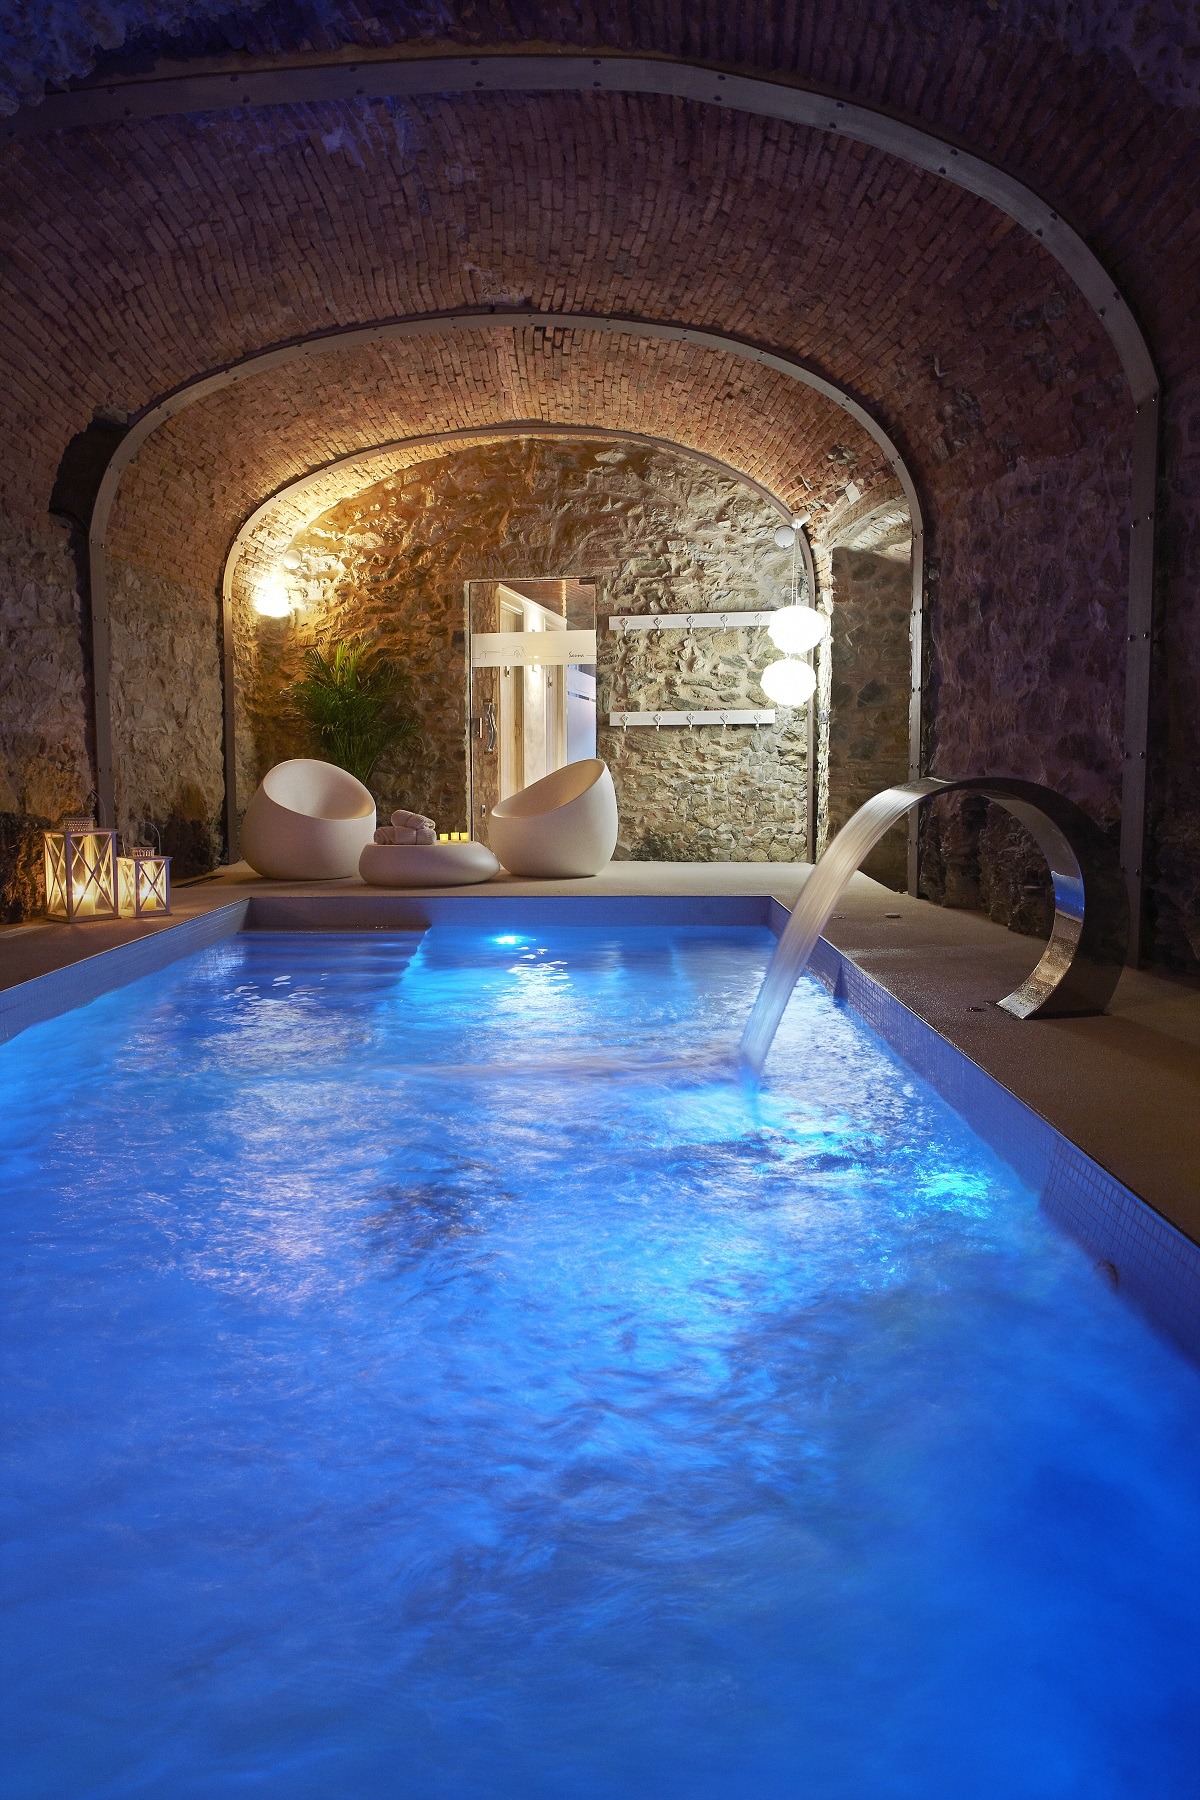 24 Hotels With Spectacular Indoor Pools | Luxury ...